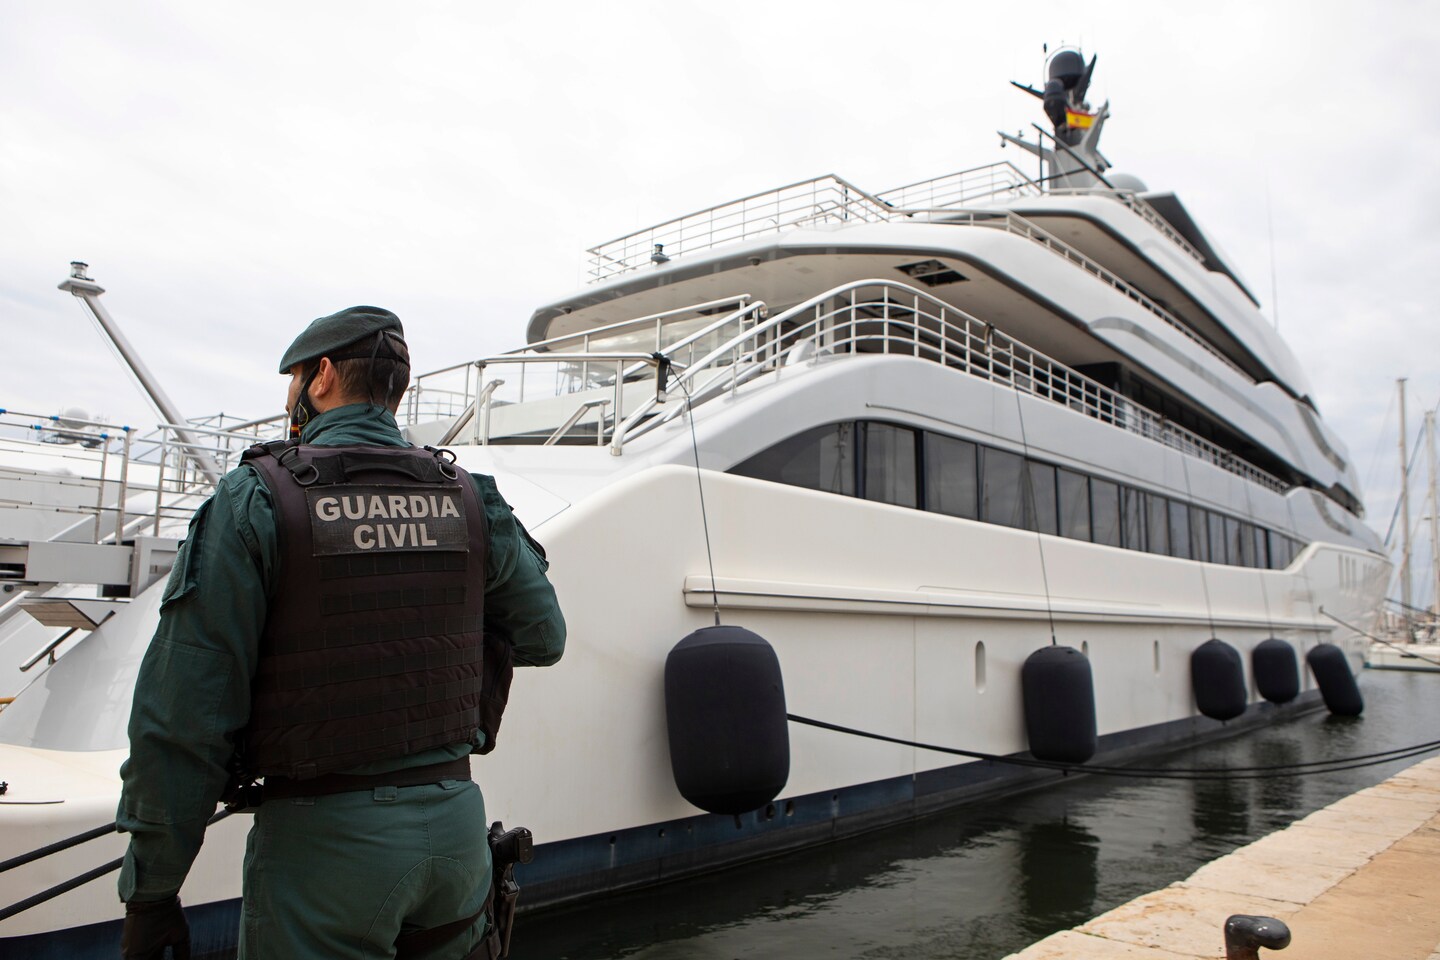 Police, US agents searching oligarch's yacht in Spain